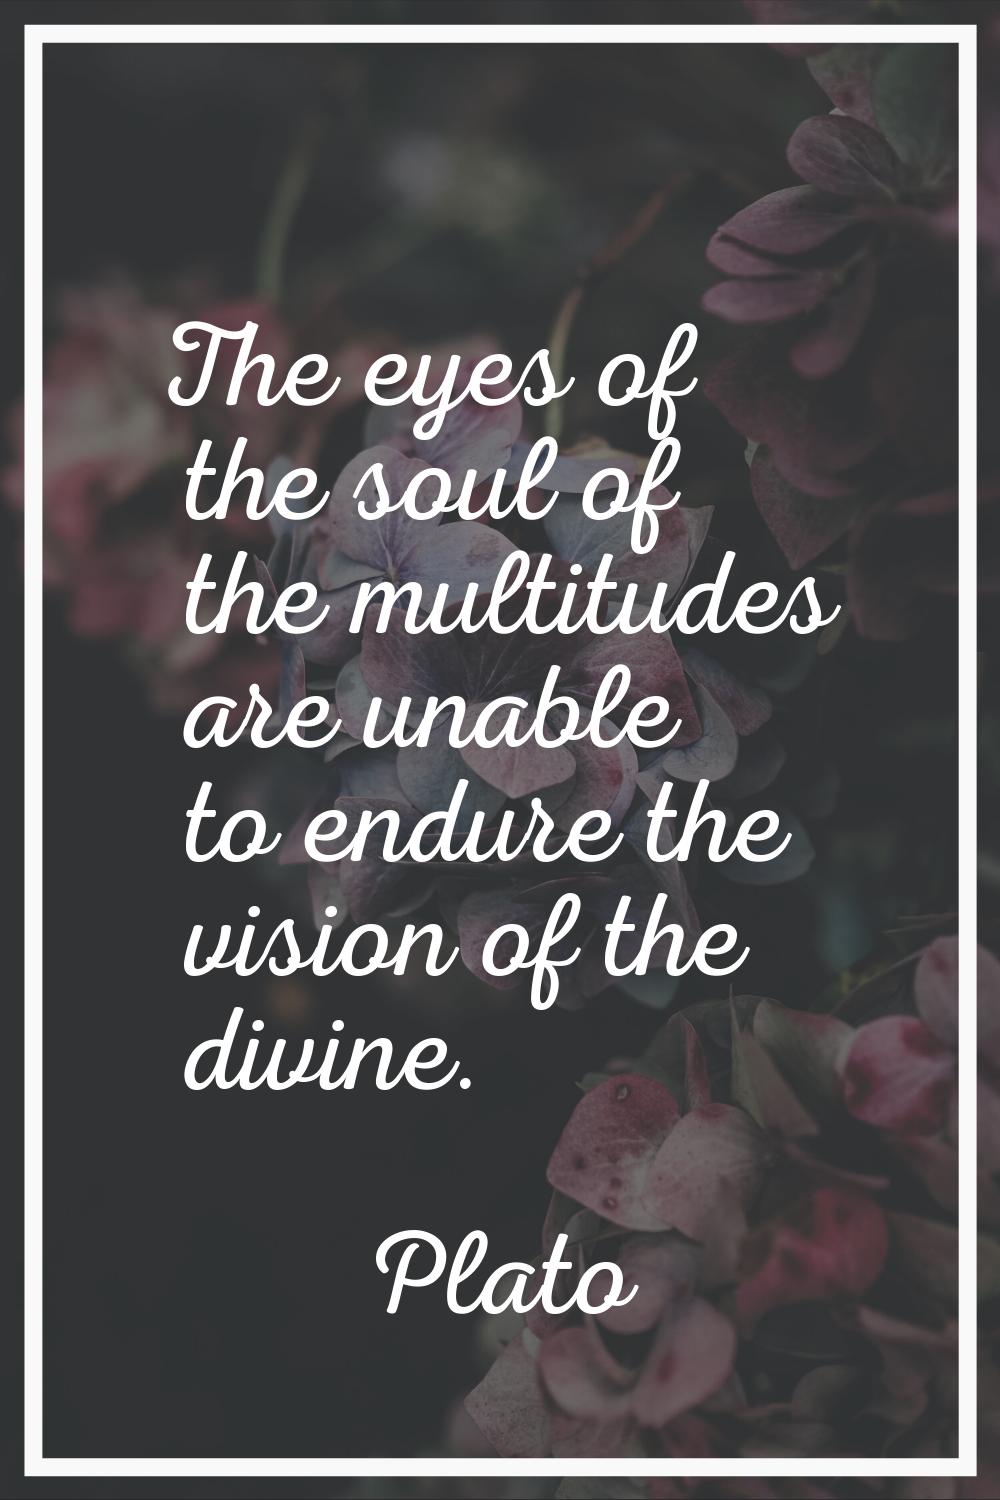 The eyes of the soul of the multitudes are unable to endure the vision of the divine.